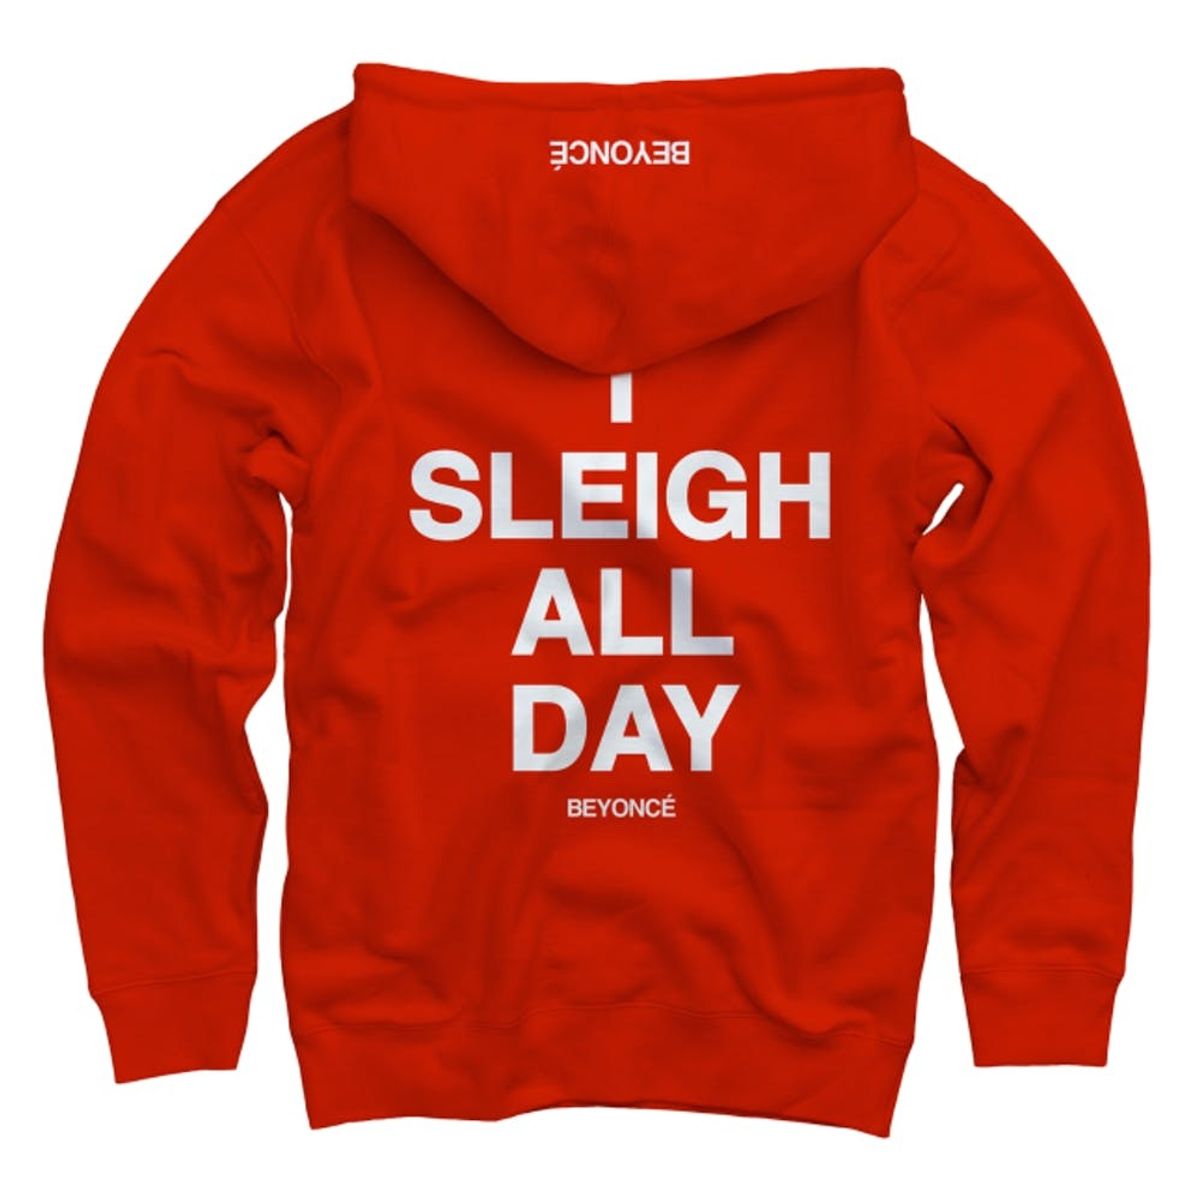 Even Non-Fans Are Going to Want Beyoncé’s Hilarious Holiday Merch